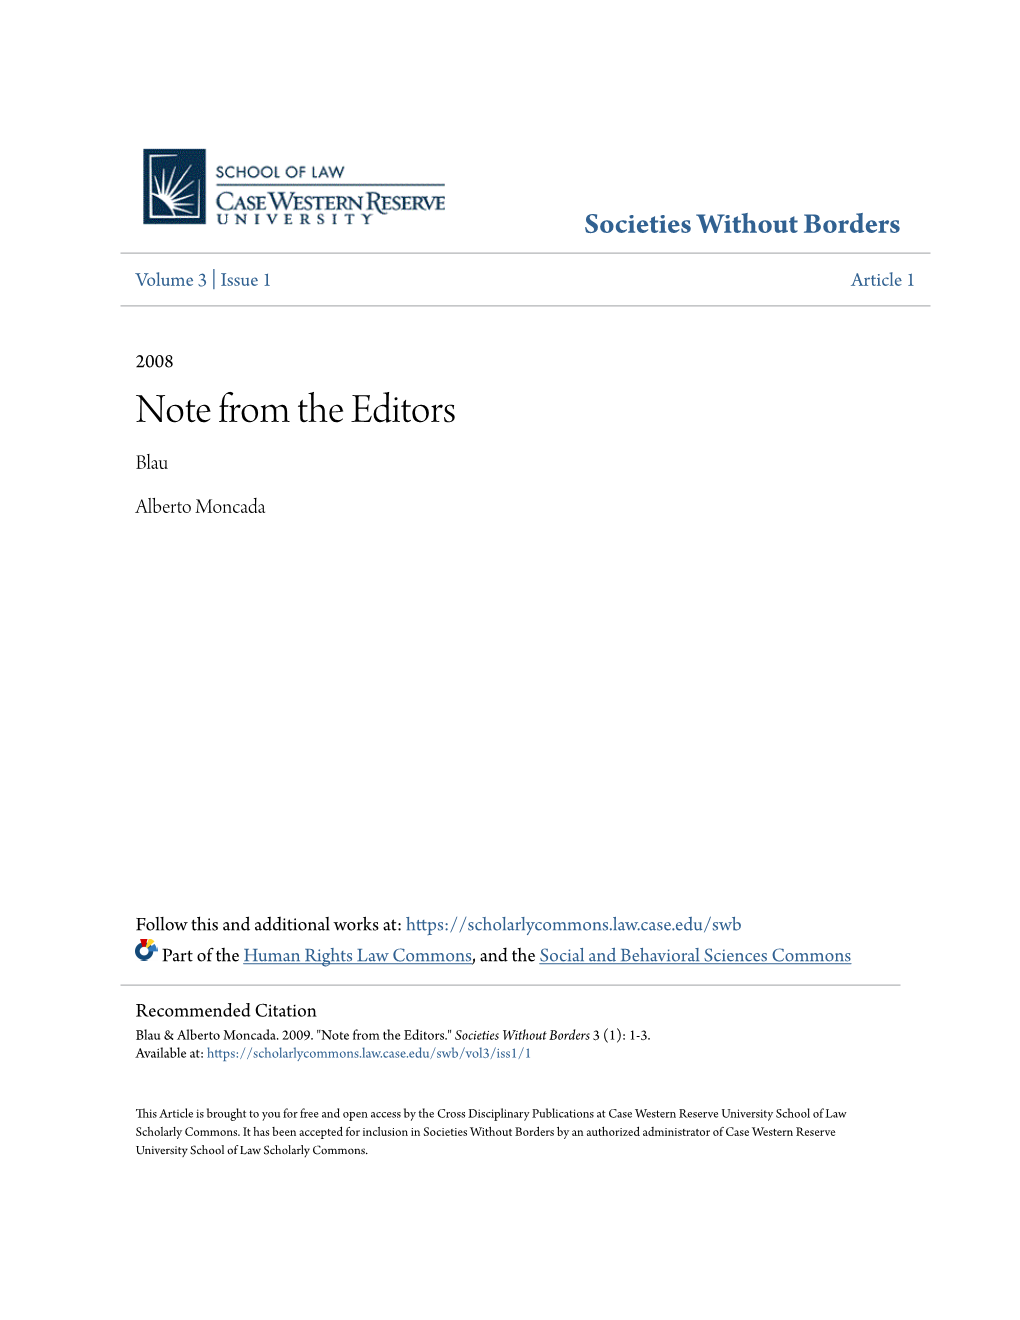 Note from the Editors Blau